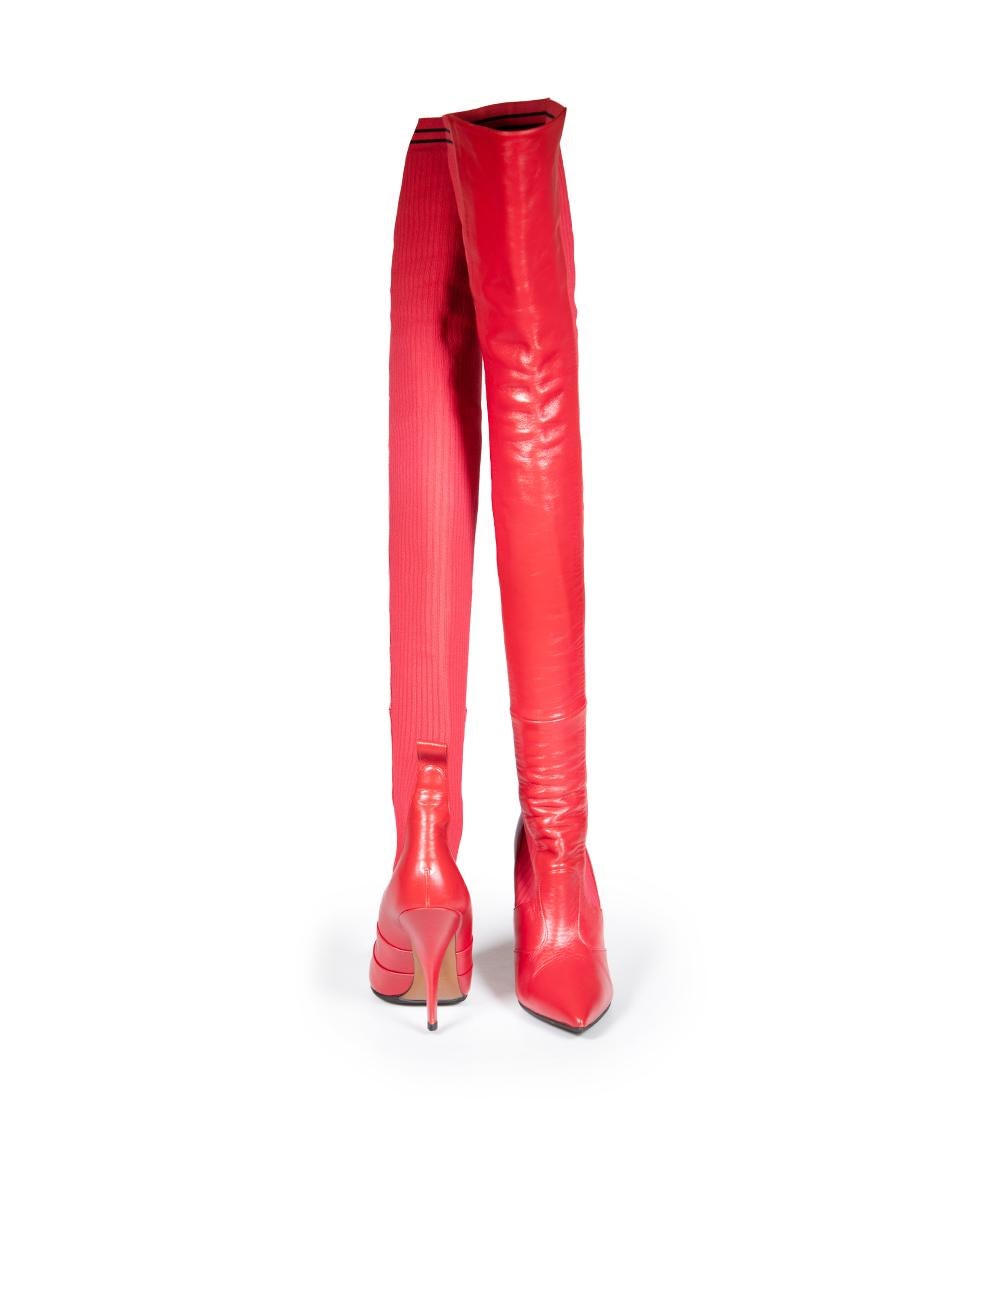 Fendi Red Leather Thigh Heeled Boots Size IT 39 In Excellent Condition For Sale In London, GB